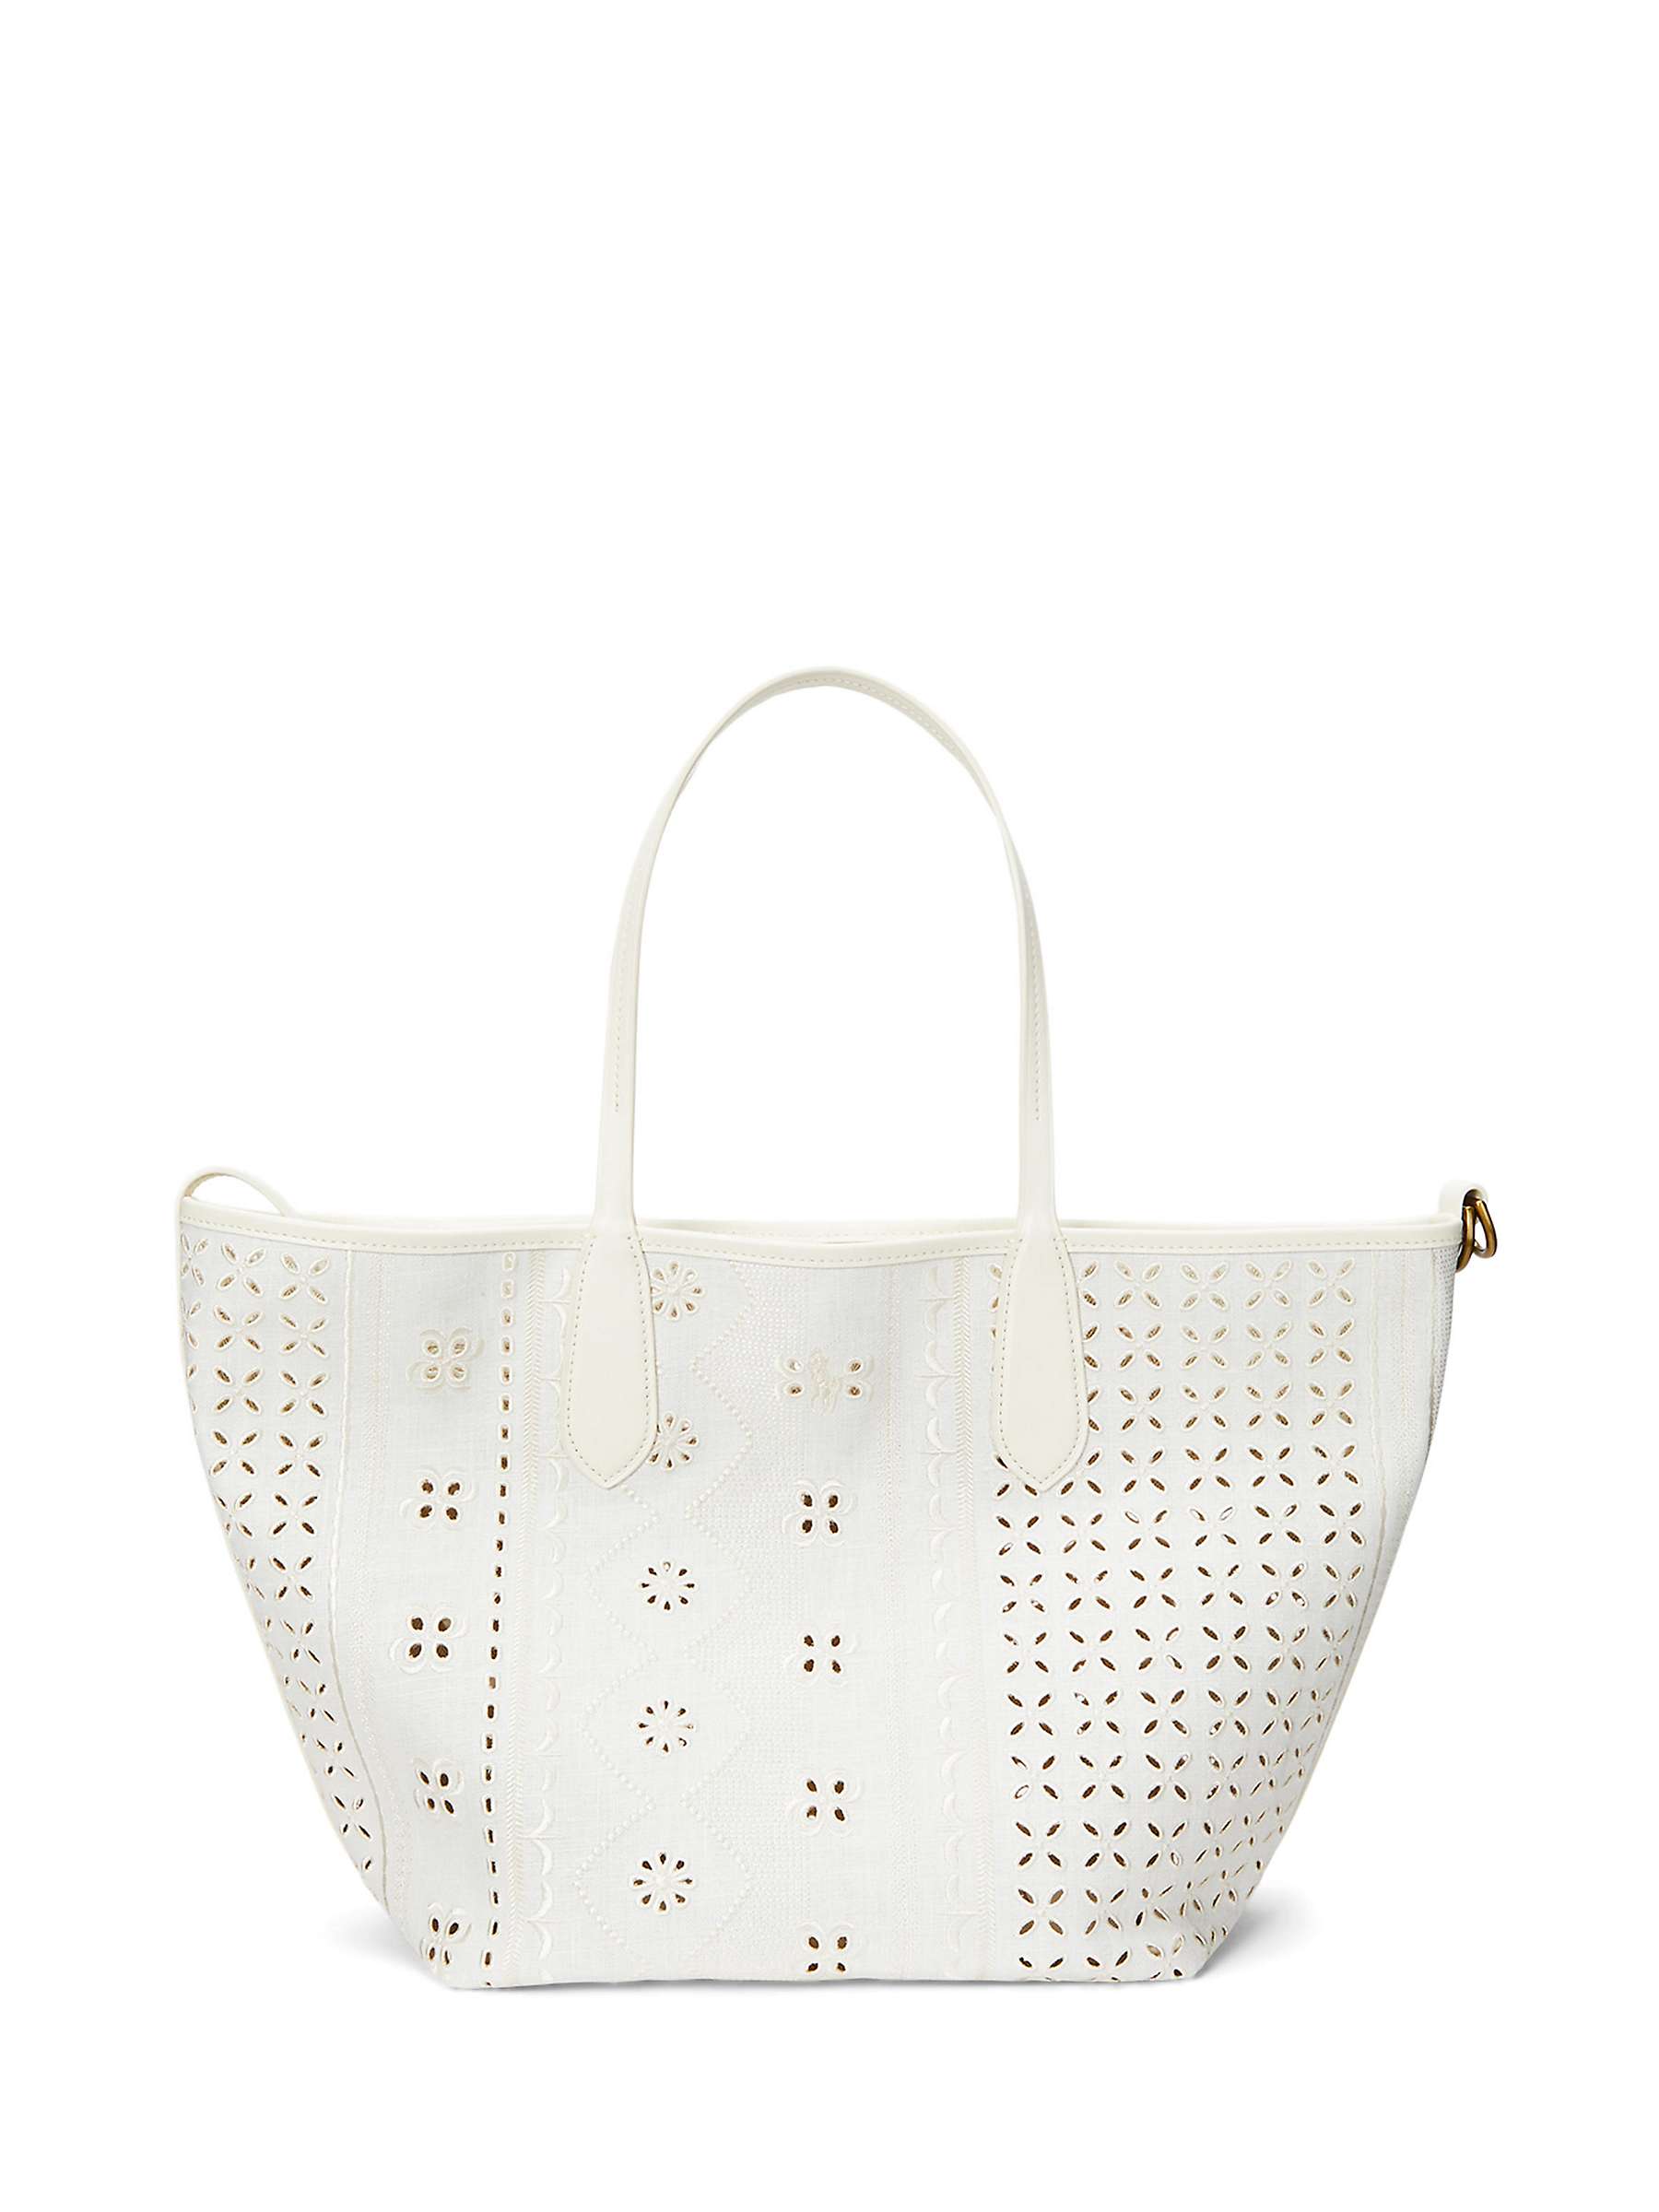 Buy Polo Ralph Lauren Bellport Embroidered Eyelet Tote Bag, White Online at johnlewis.com